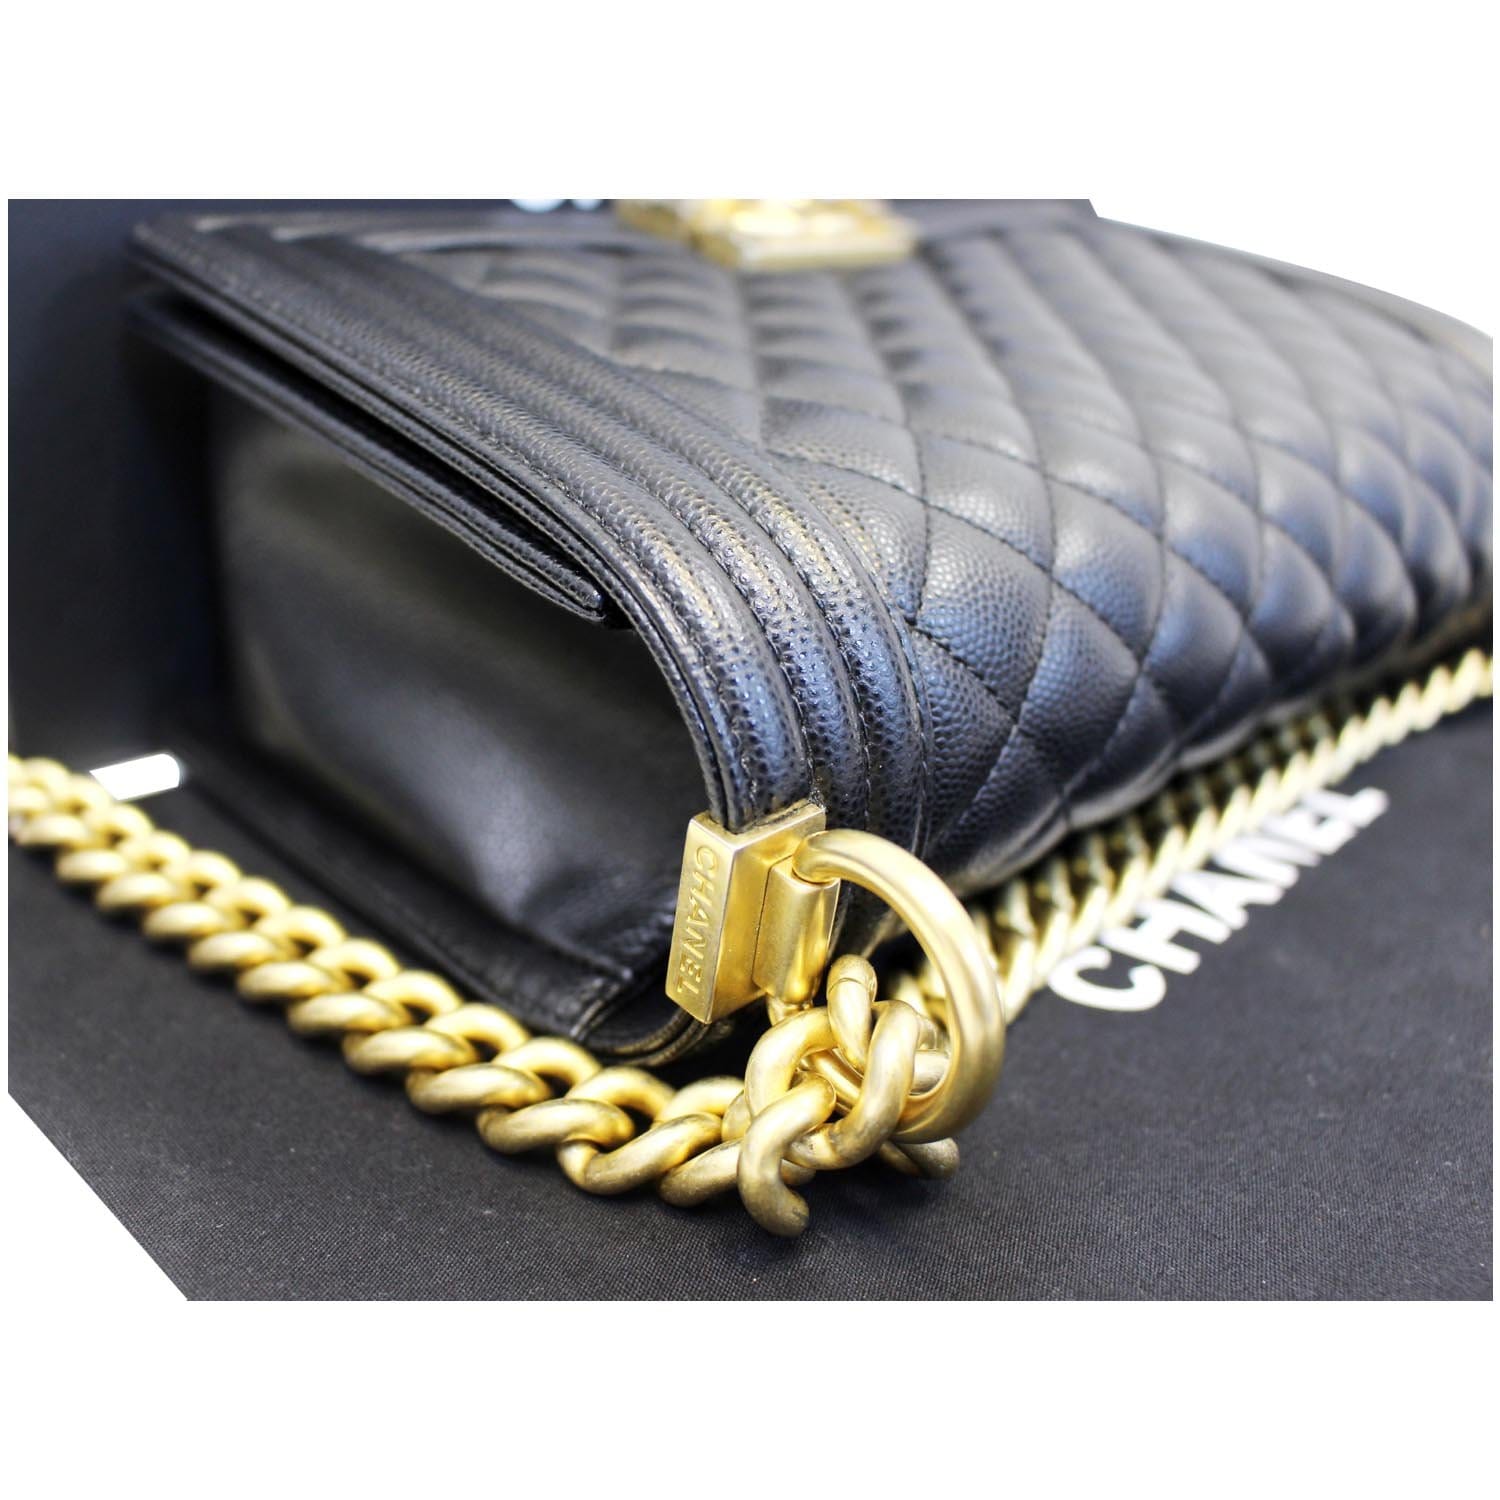 Chanel Large Boy Zip Pouch Blue Black Pre Owned – Debsluxurycloset